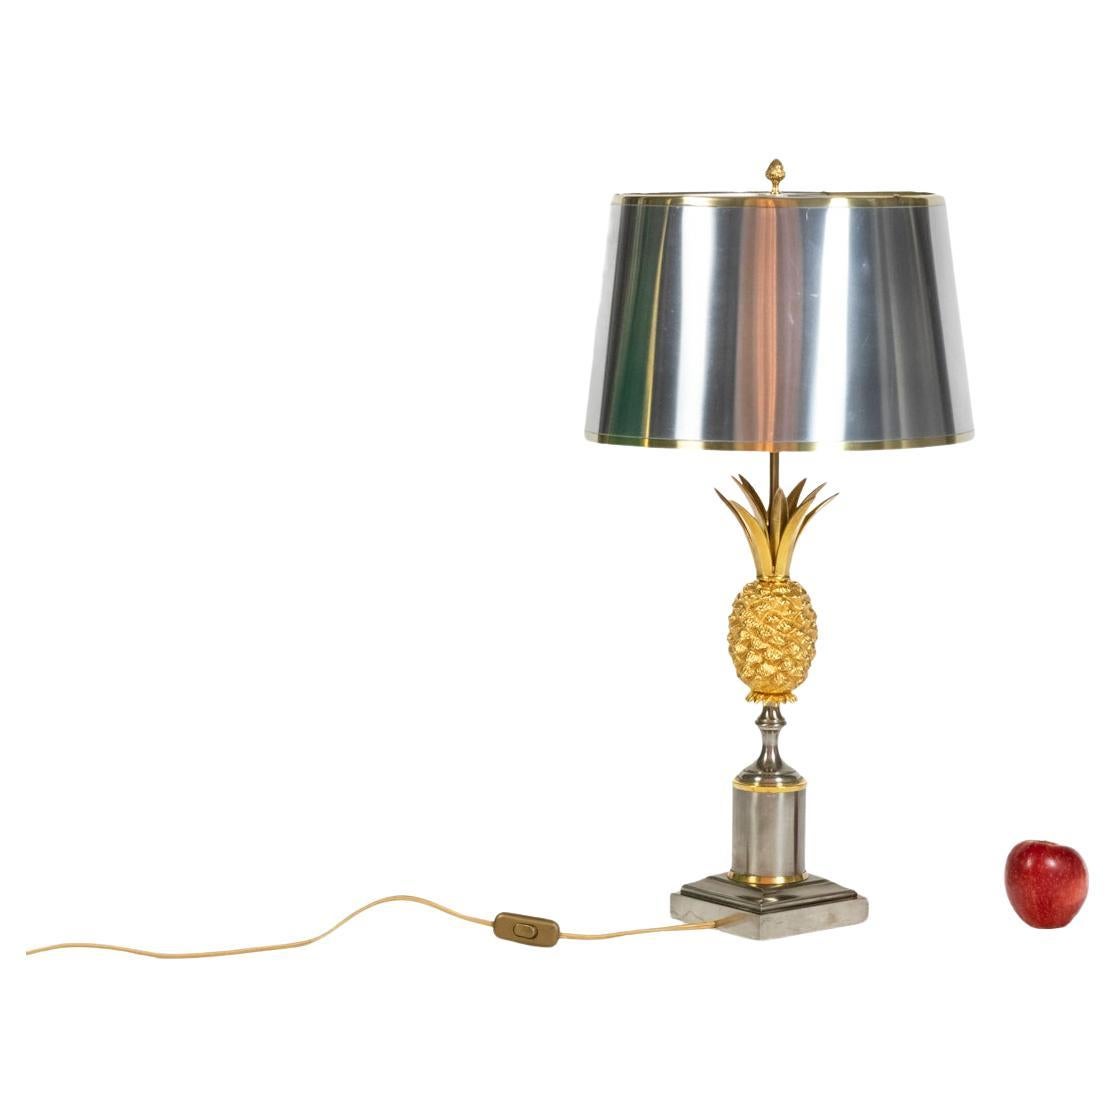 Maison Charles. Lamp in gilded bronze and sheet metal. 1970s.